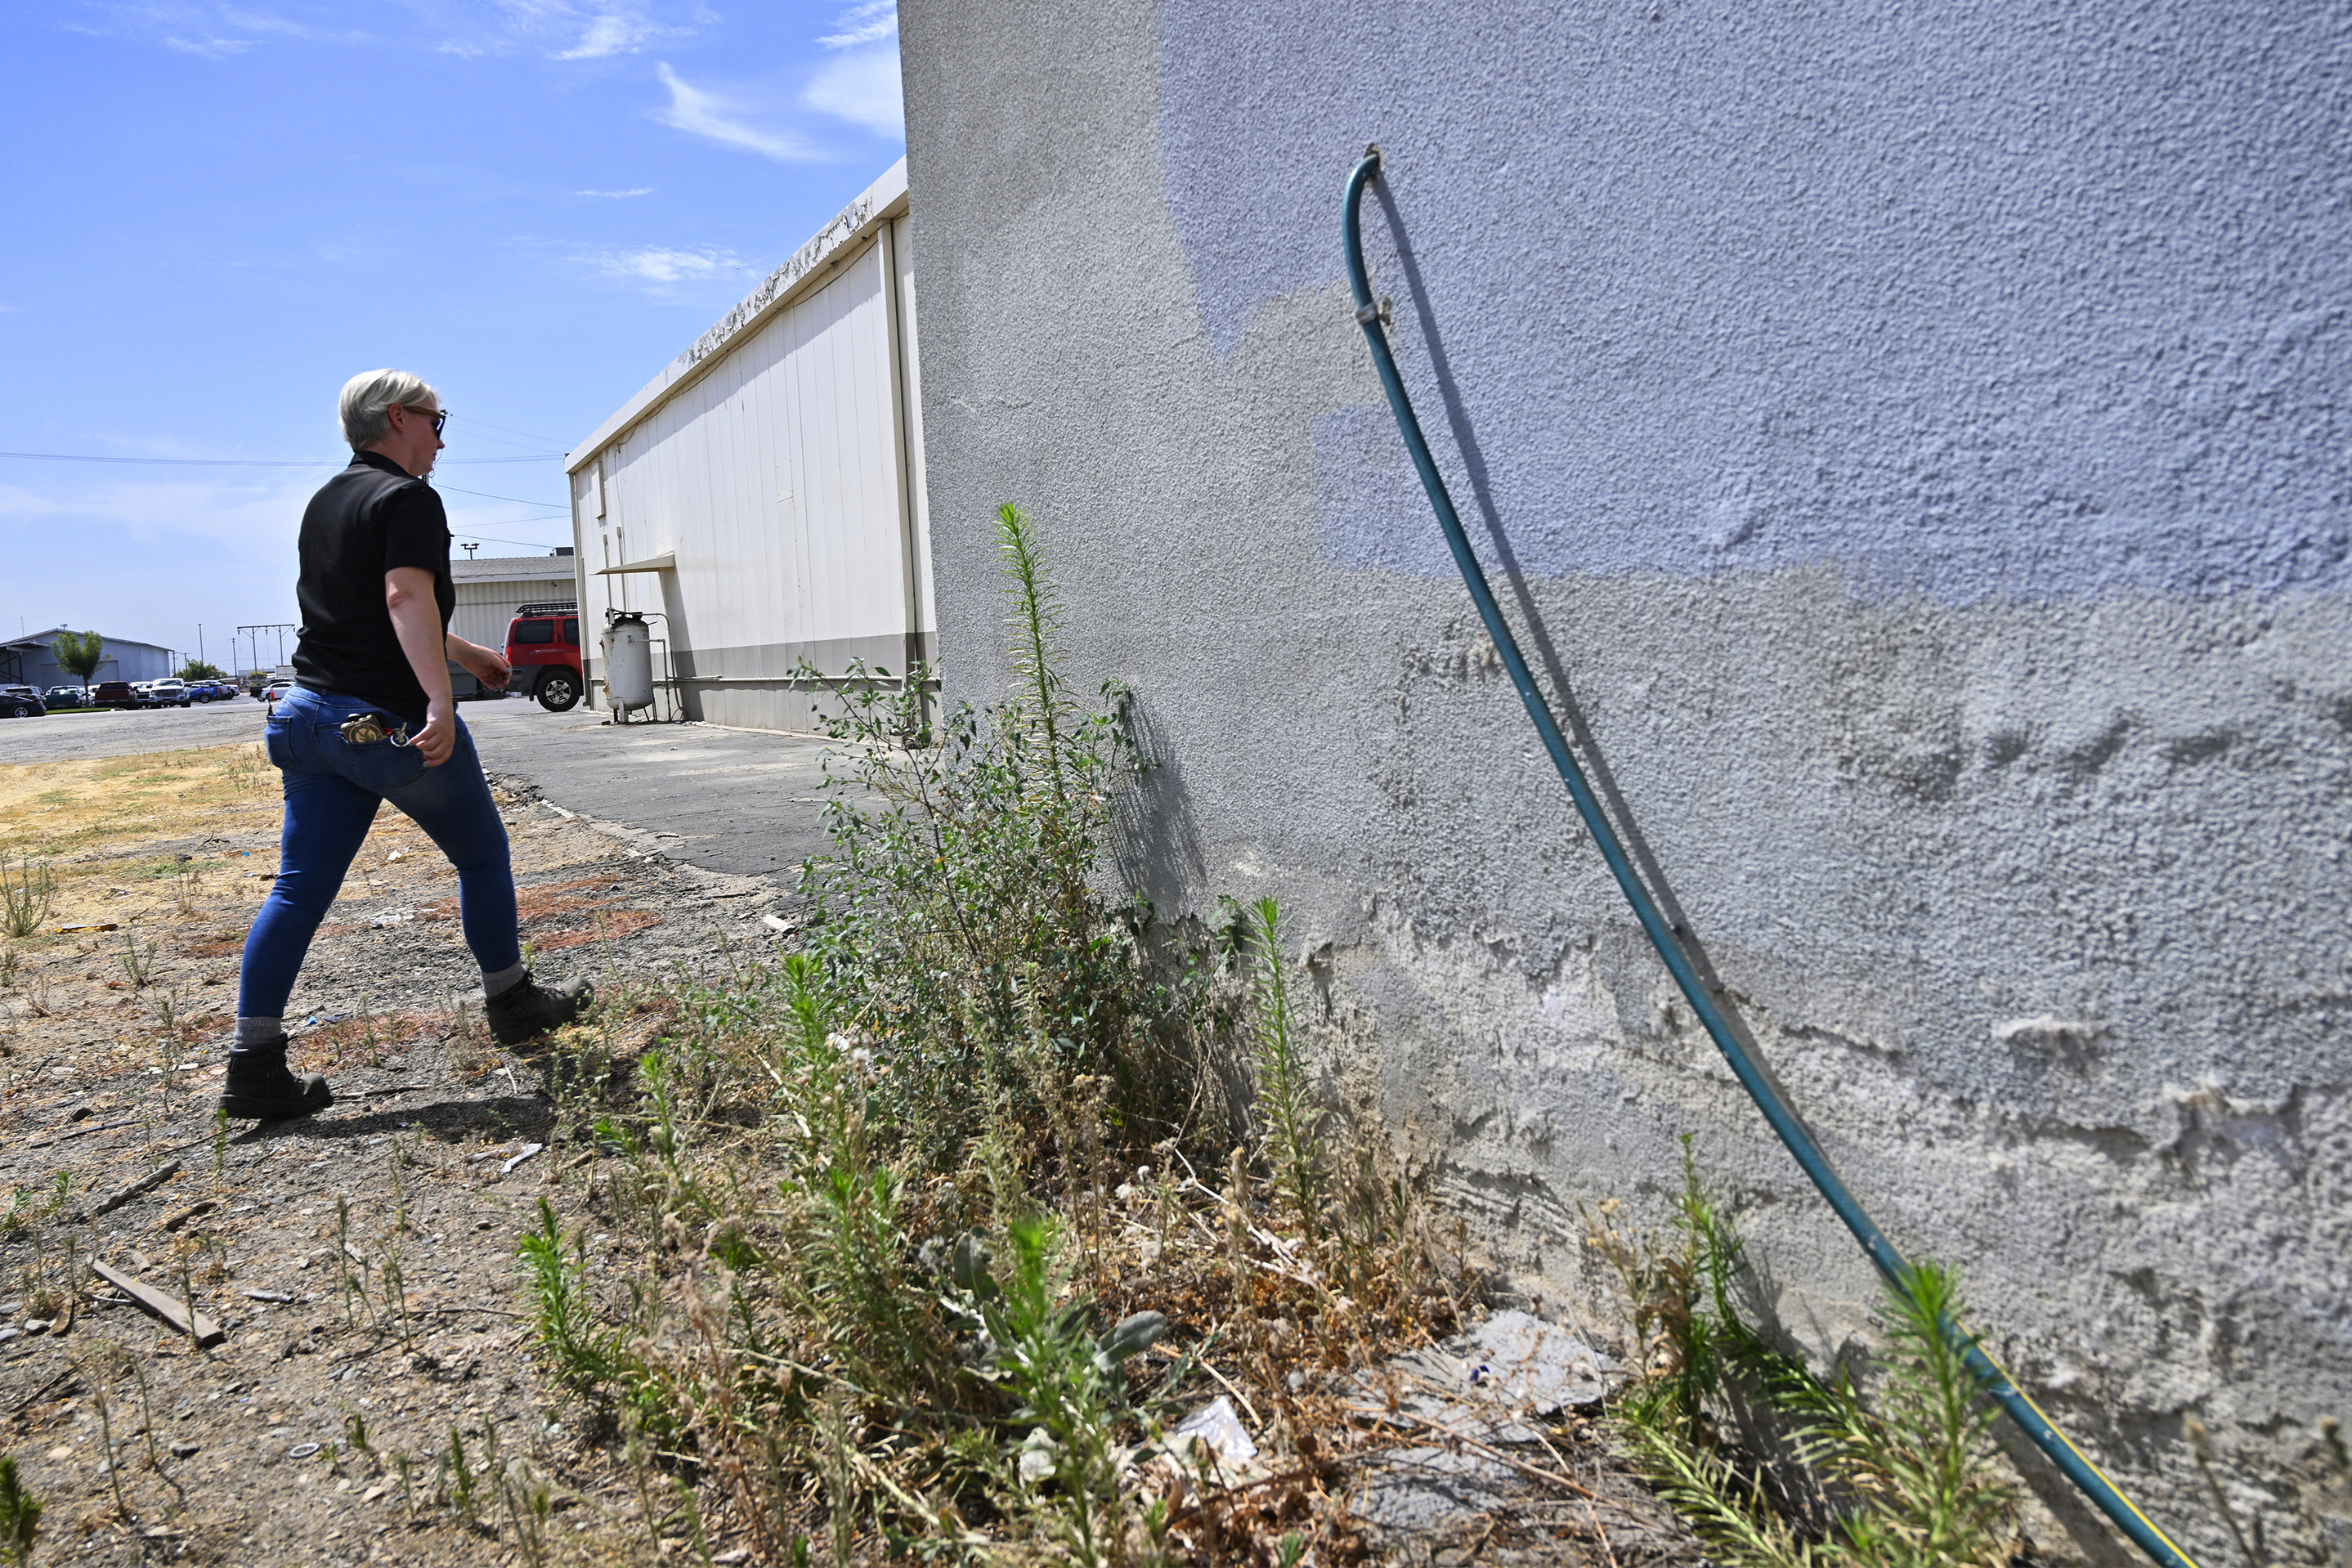 Code enforcement officer Jesalyn Harper walks past the garden hose that tipped her off to an illegal medical lab operating in Reedley, California, on Aug. 1. Photo: The Fresno Bee via AP